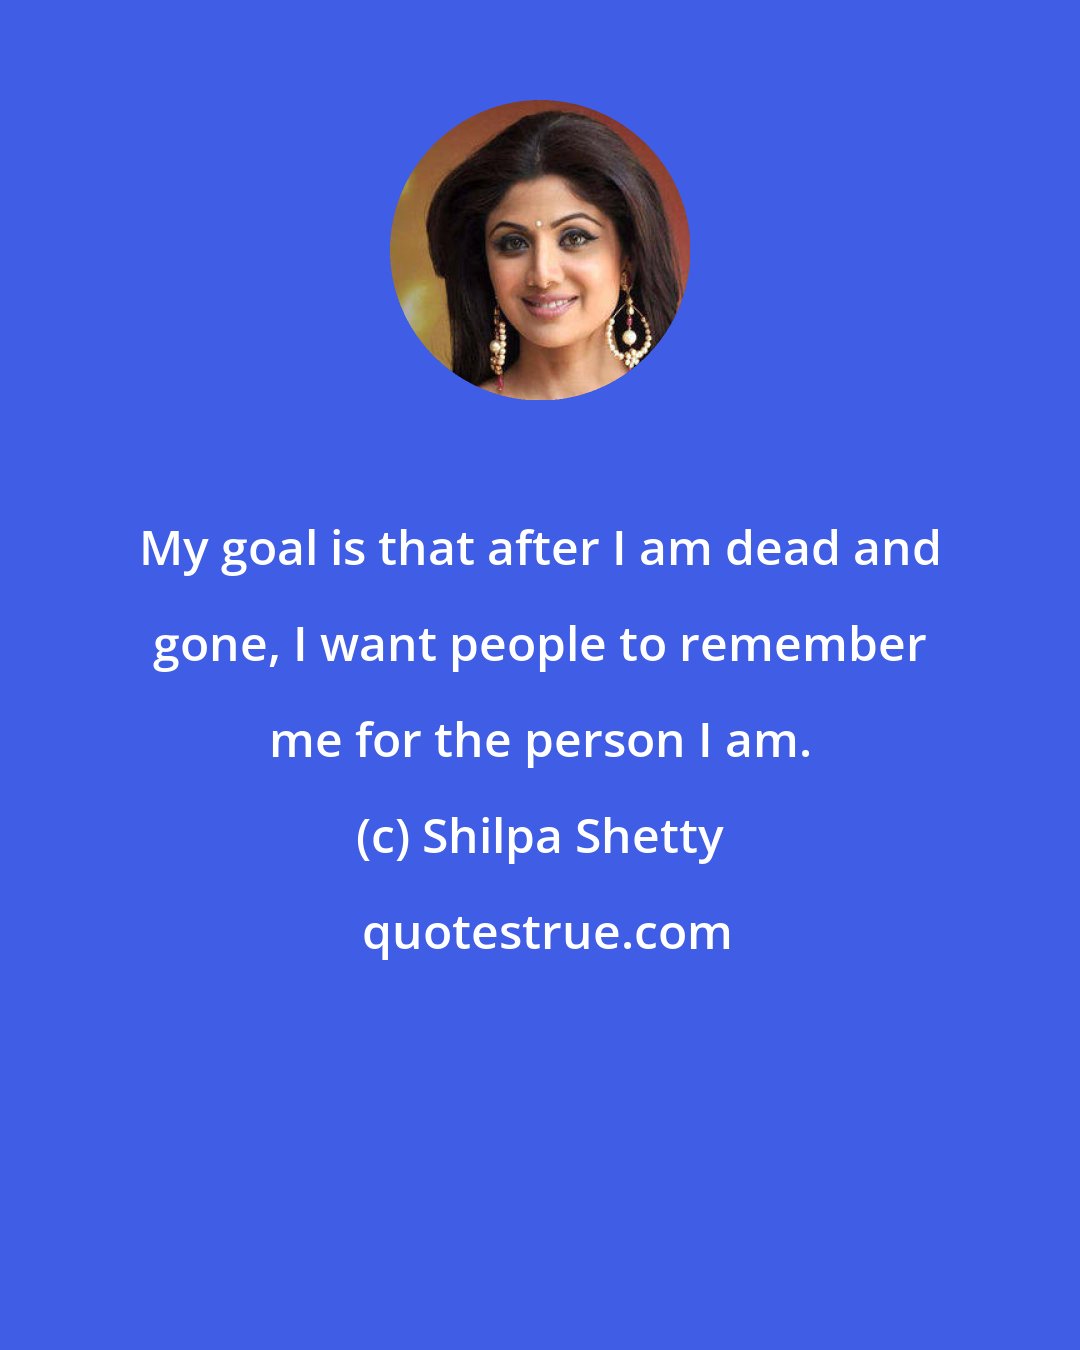 Shilpa Shetty: My goal is that after I am dead and gone, I want people to remember me for the person I am.